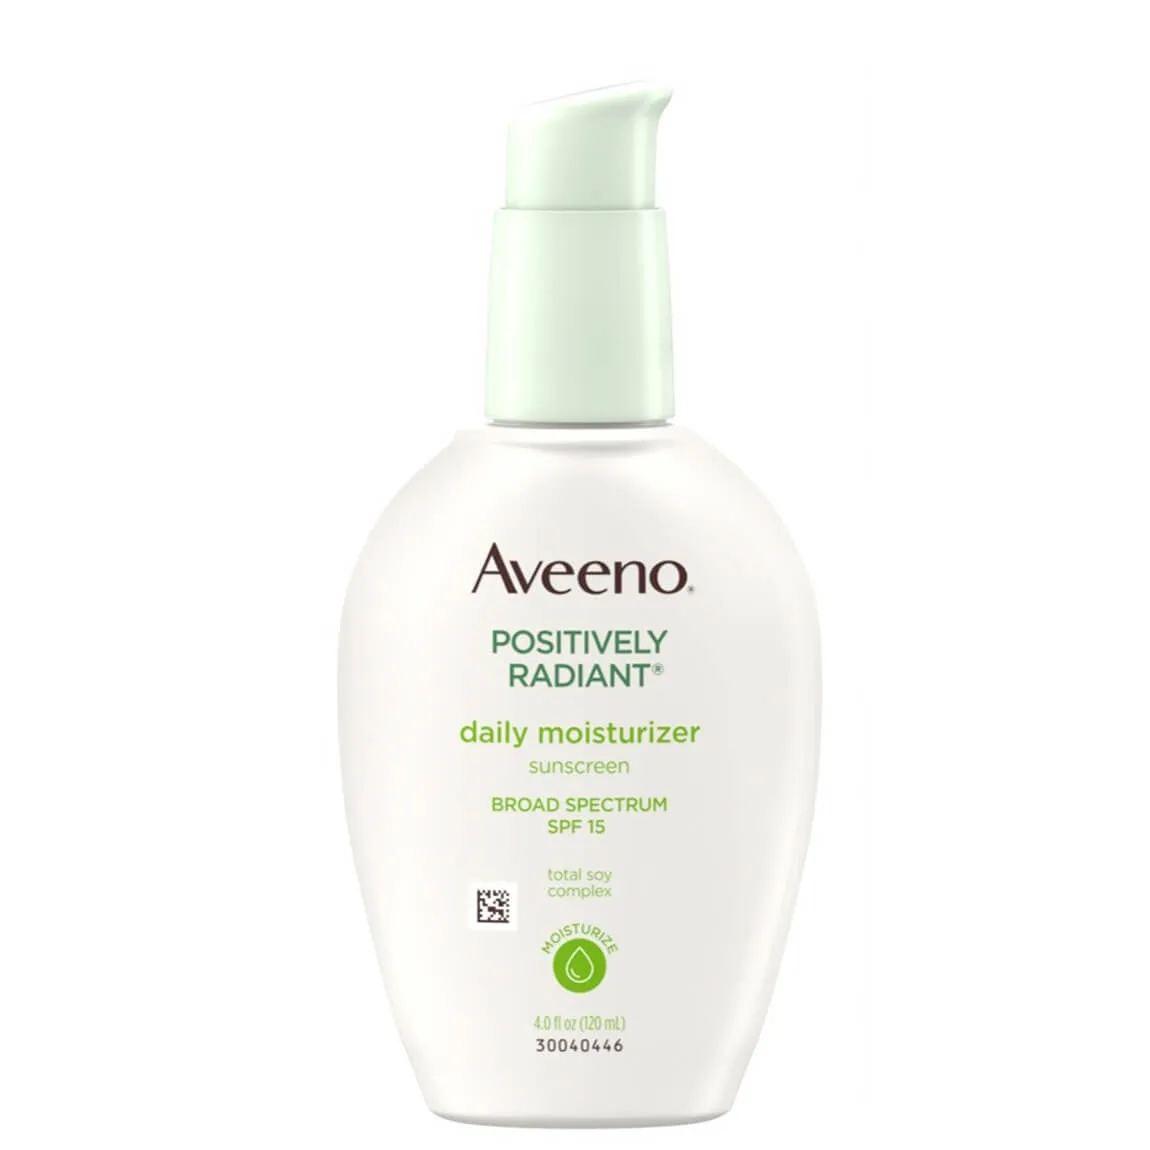 FEMMENORDIC's choice in Aveeno Positively Radiant vs Clear Complexion moisturizer comparison, Aveeno Positively Radiant Daily Face Moisturizer SPF 15